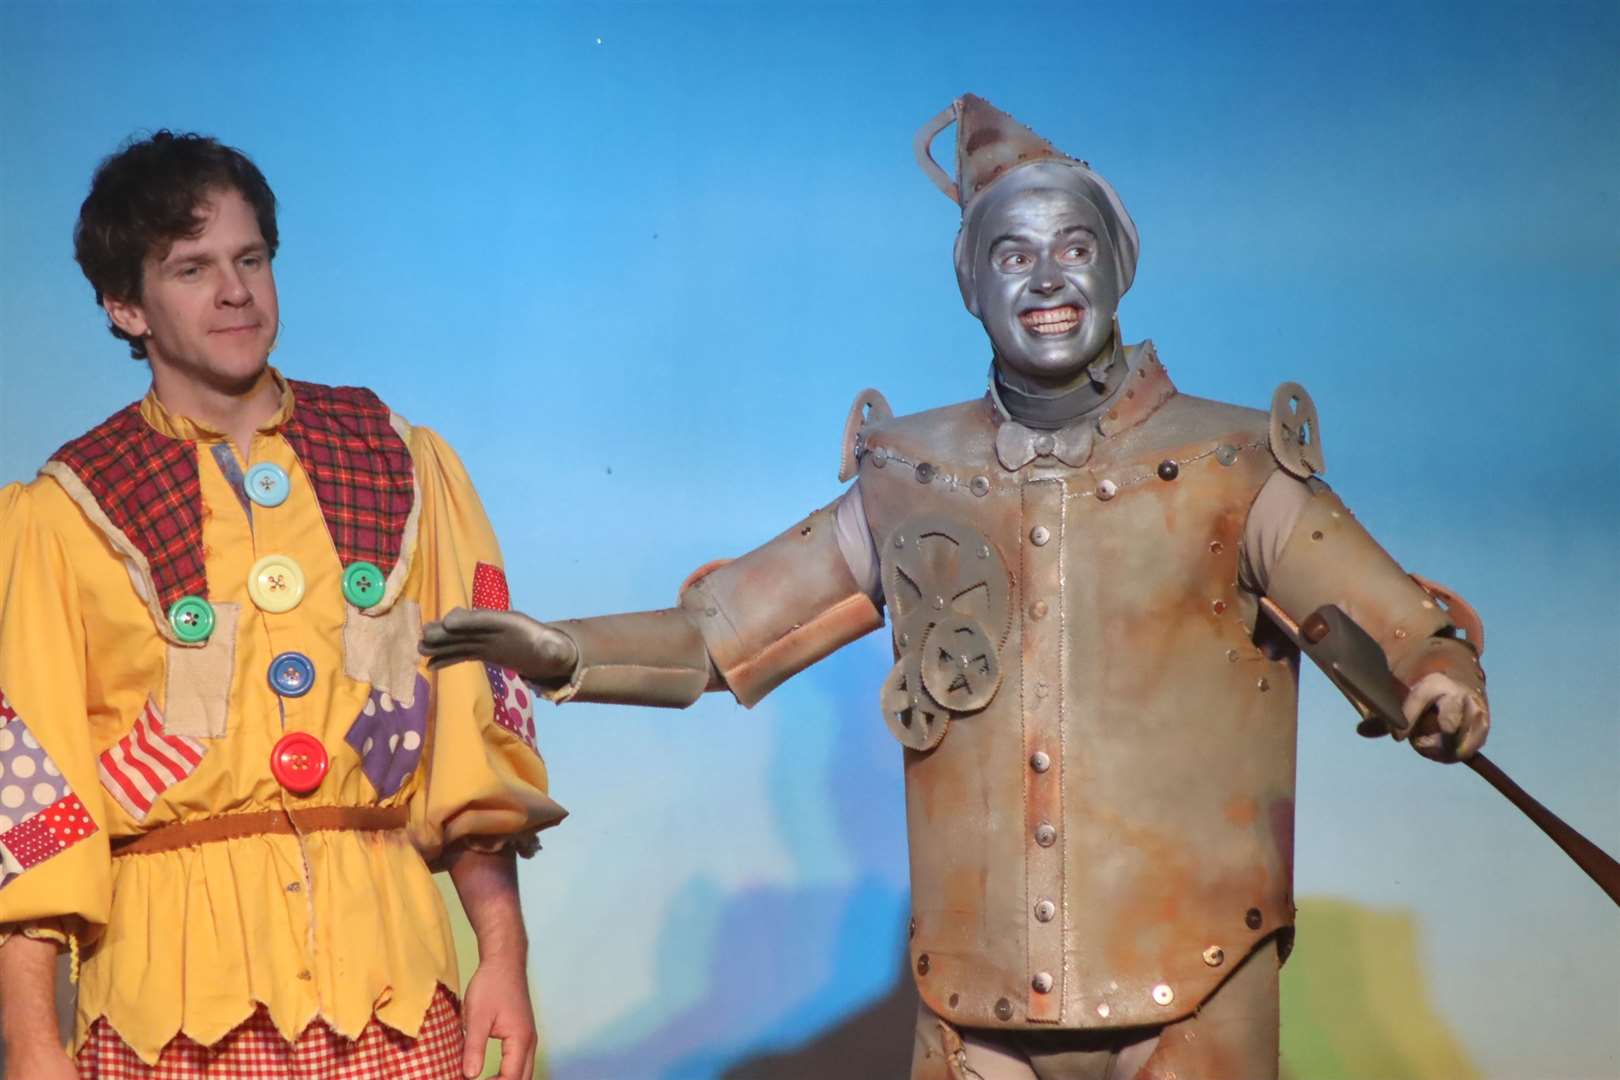 Scarecrow Tom Balmont and Tin Man Ryan Byrne in the Wizard of Oz at Swallows Leisure Centre, Sittingbourne (24320950)